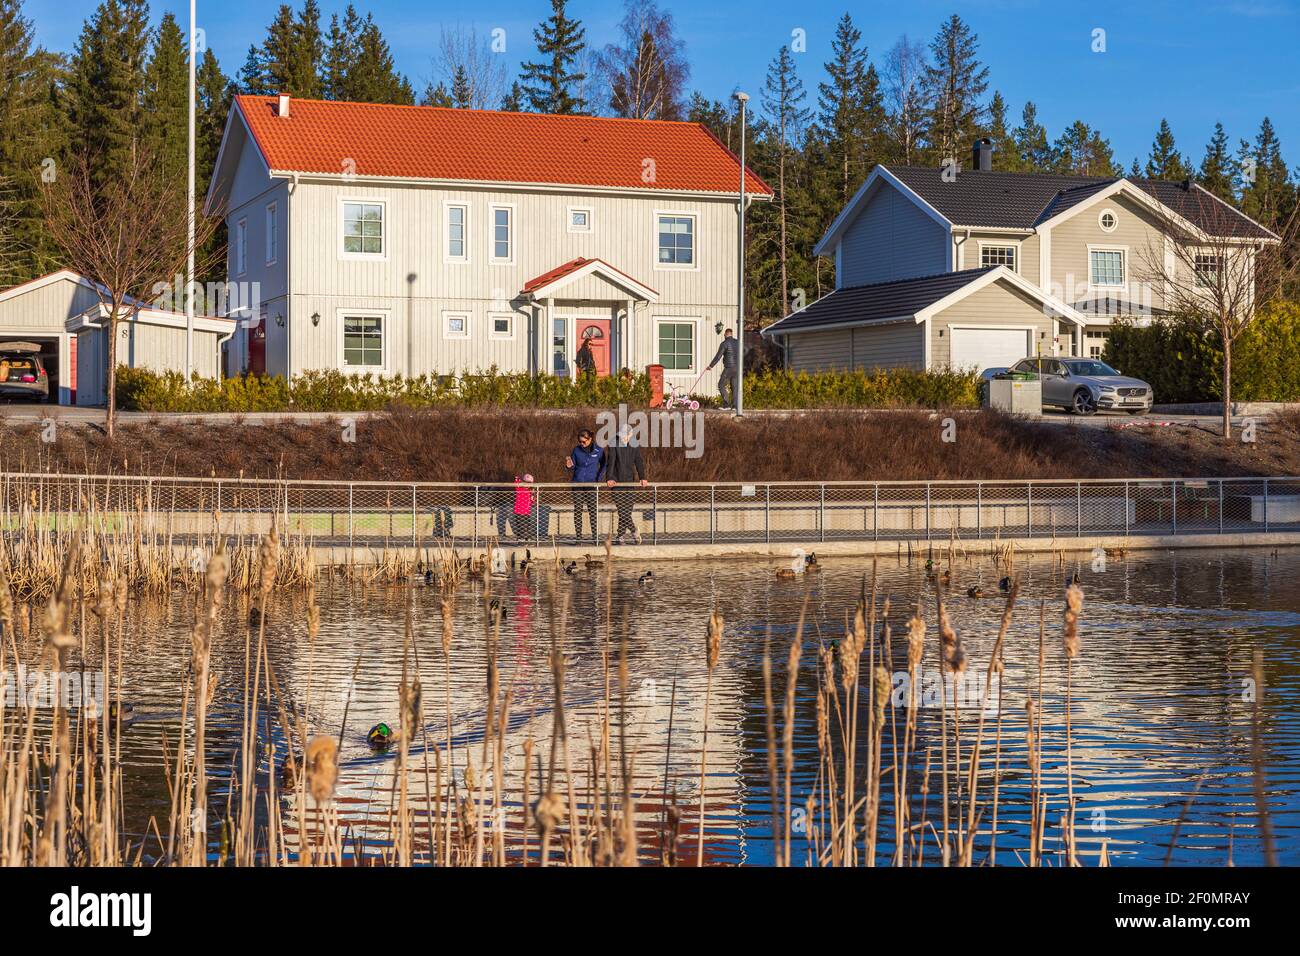 Beautiful spring landscape view. Family with child walking near local pond. Another family leaving their home for walking. Uppsala.  Sweden Stock Photo